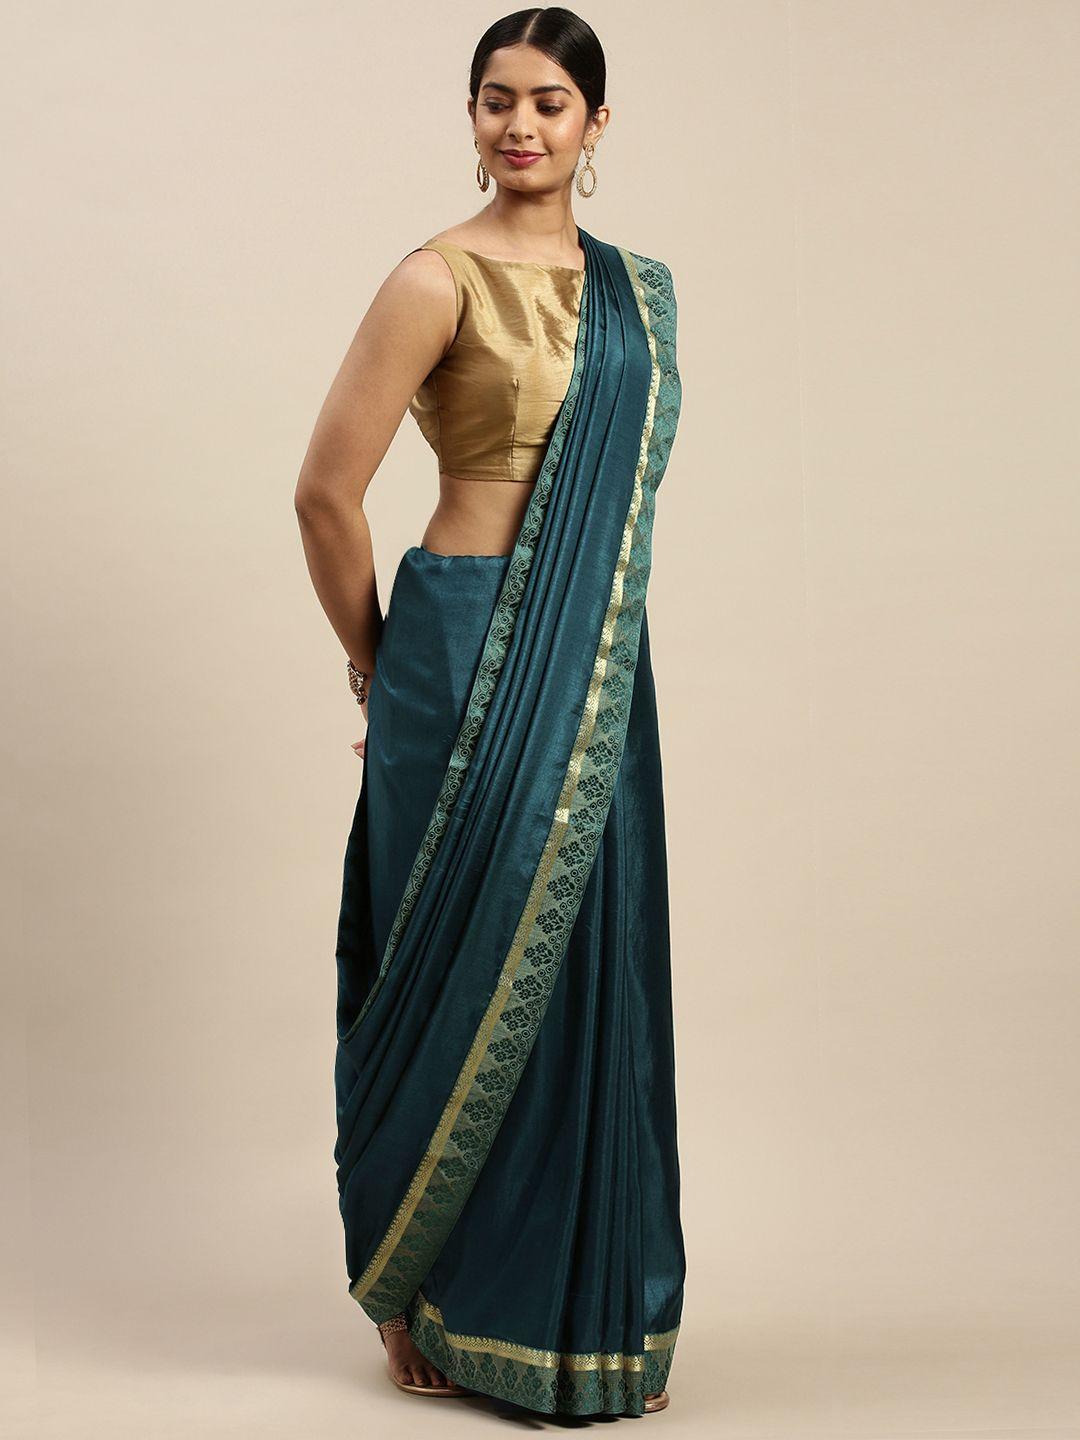 indian-women-teal-green-solid-ready-to-wear-saree